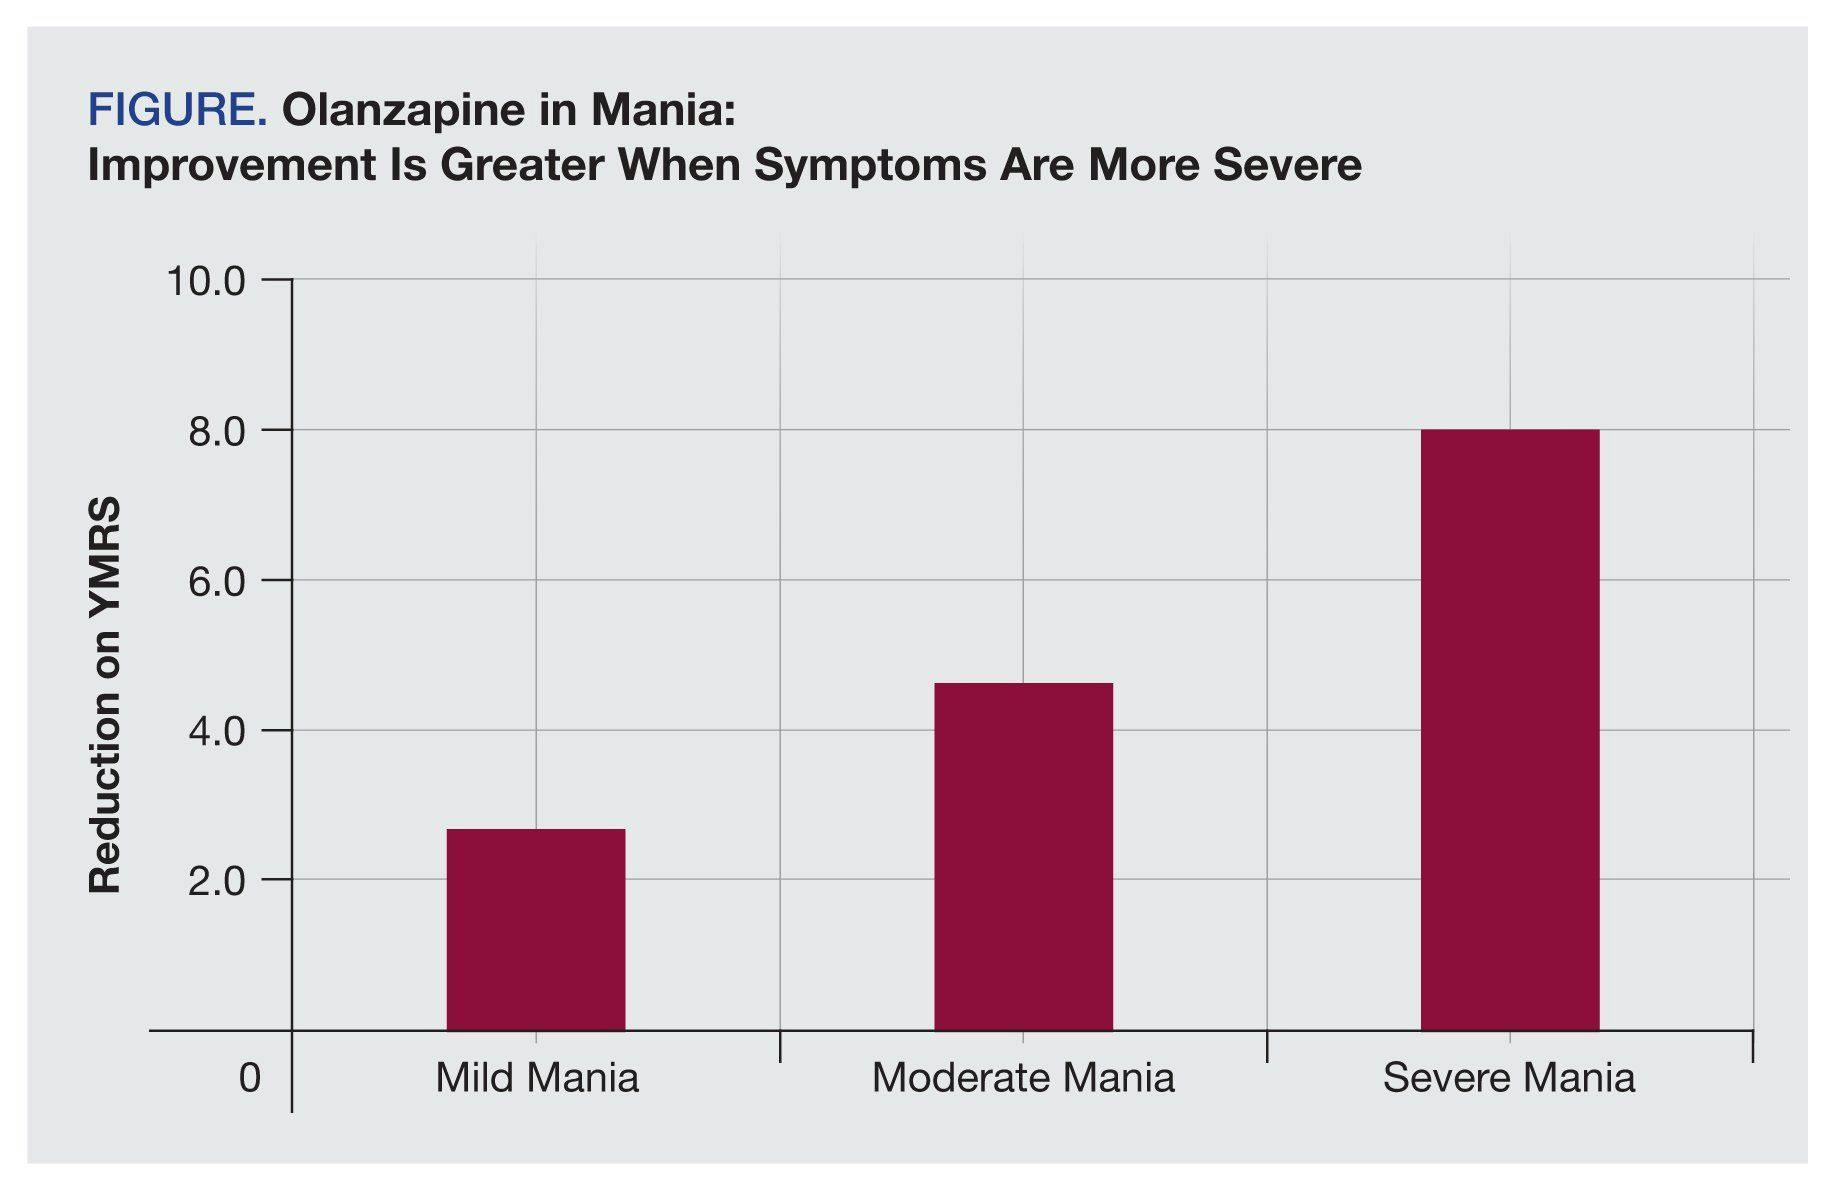 Olanzapine in Mania: Improvement Is Greater When Symptoms Are More Severe